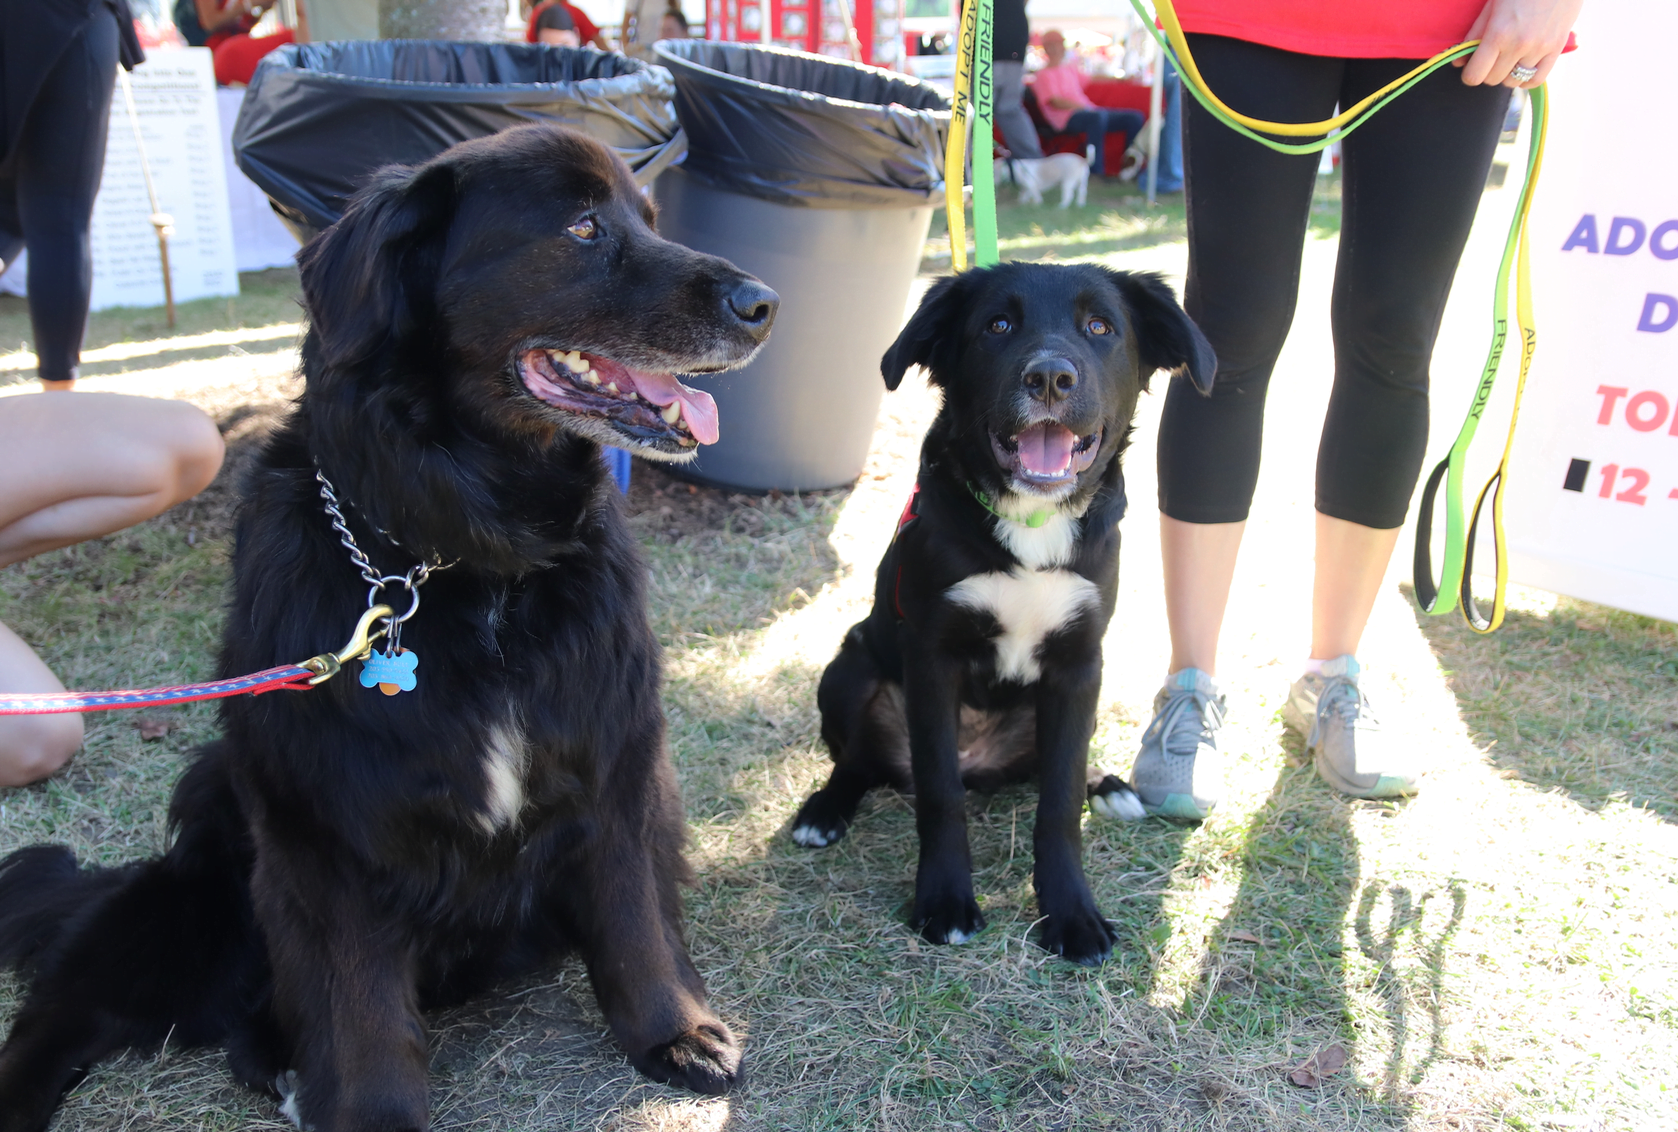 Shay (at right) is a dog available for adoption from Adopt A Dog. He is one of several named after baseball stadiums. Sept. 29, 2019 Photo: Leslie Yager